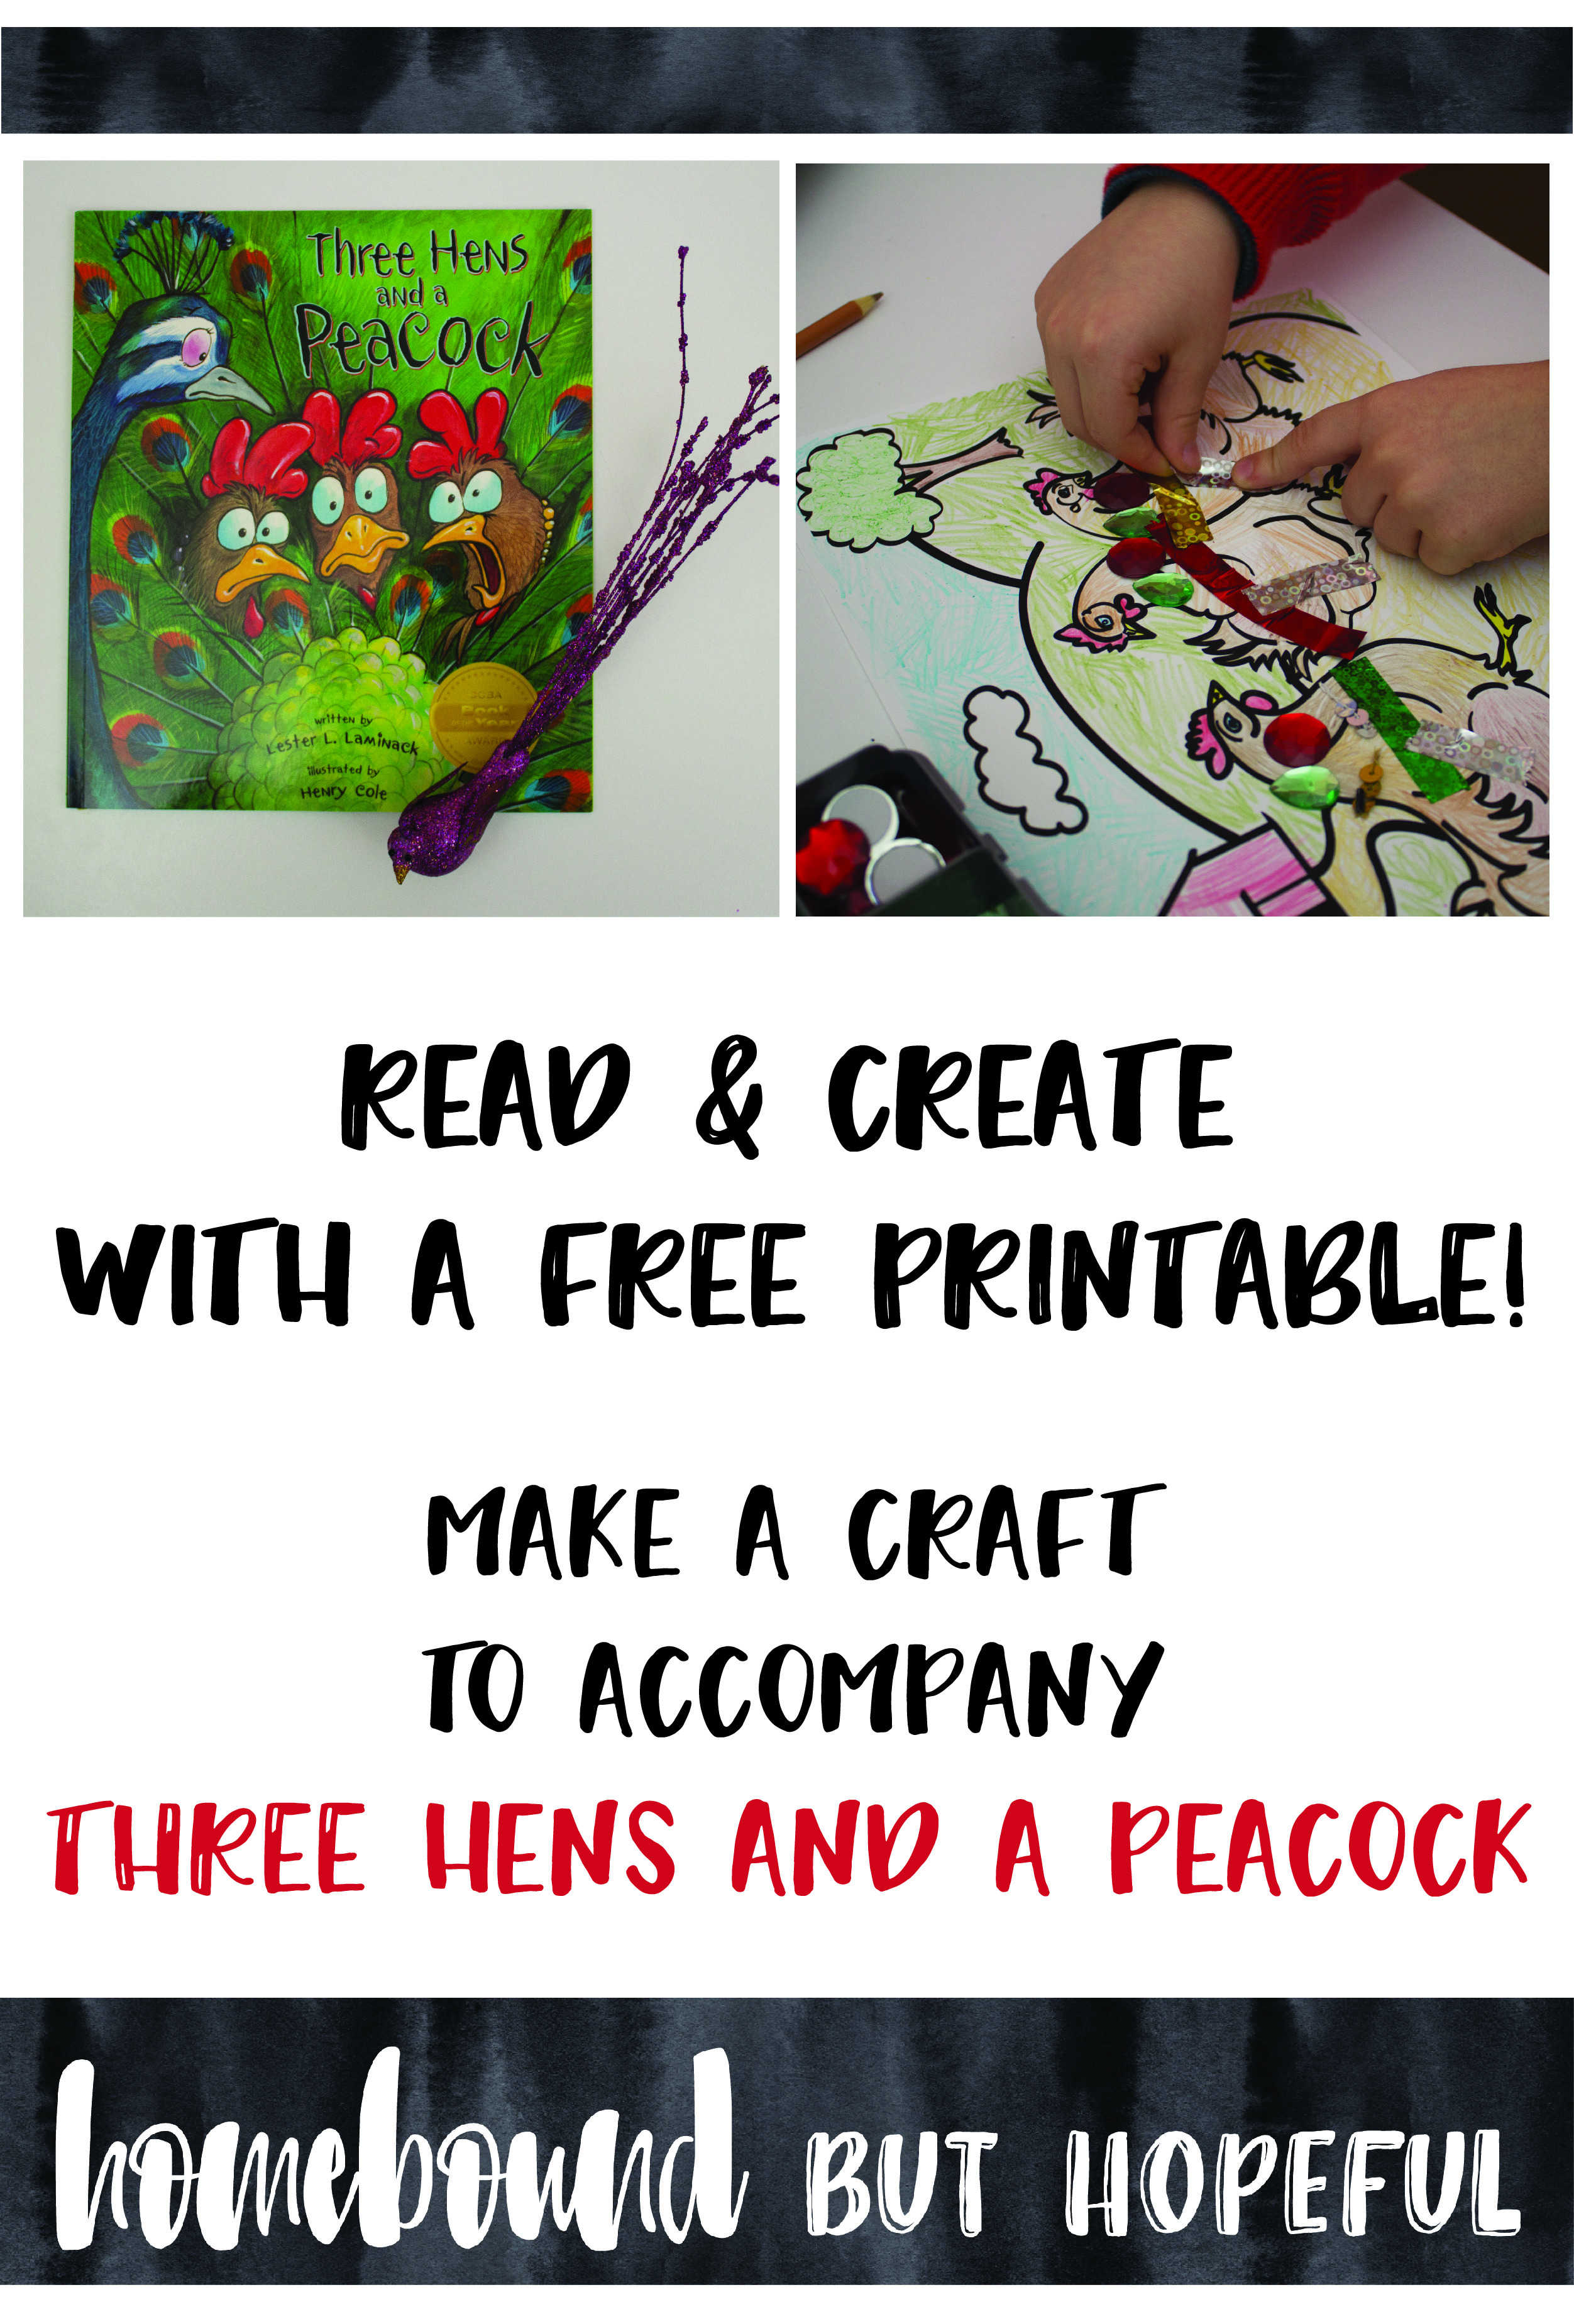 Gussy up your hens after reading the adorable "Three Hens and a Peacock". Includes a free printable to get you started!